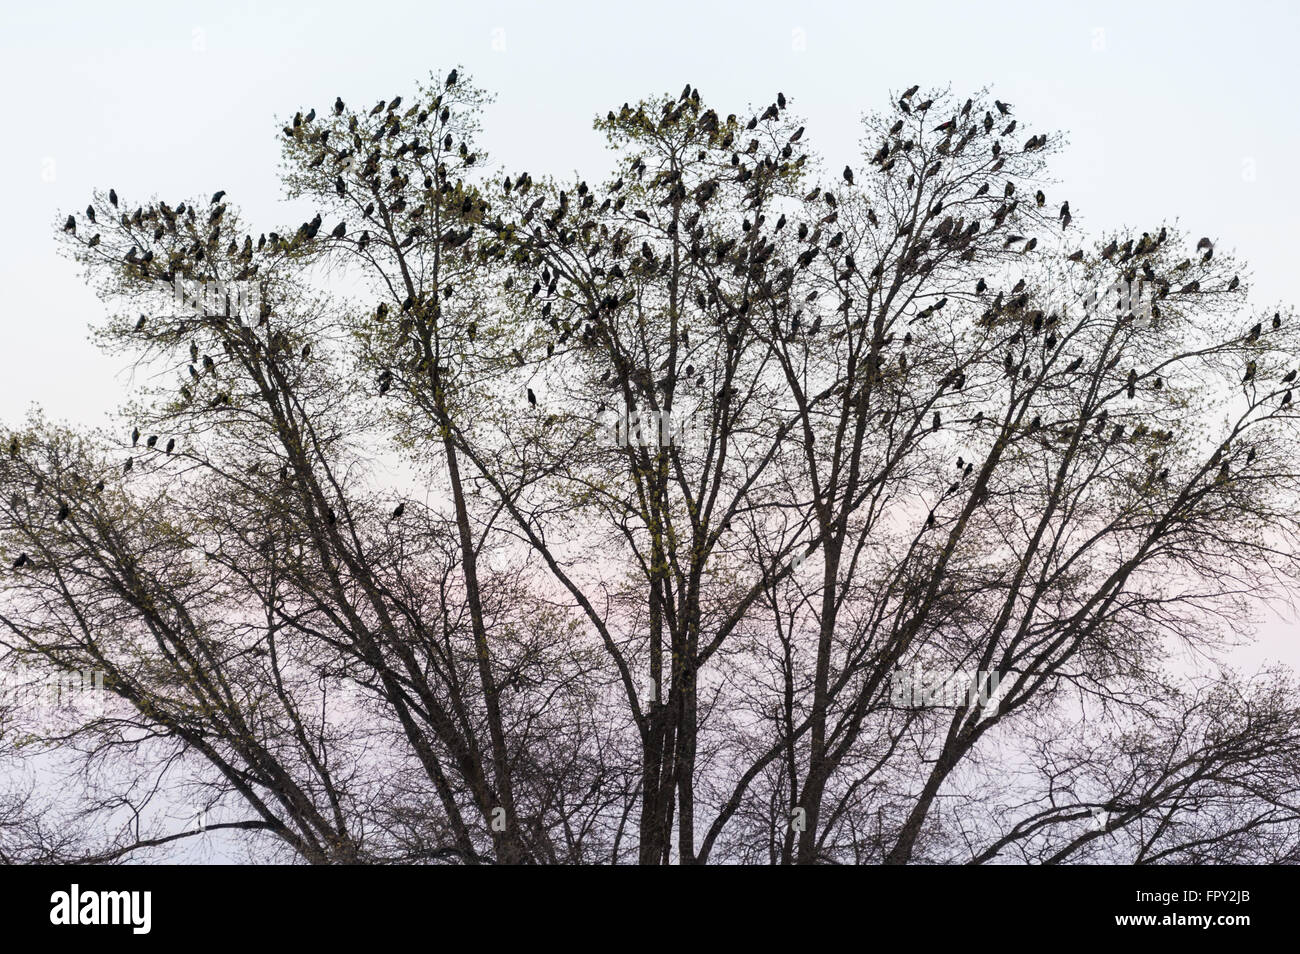 A large flock of birds perched in the branches of a tree at dusk in Atlanta, Georgia. Stock Photo